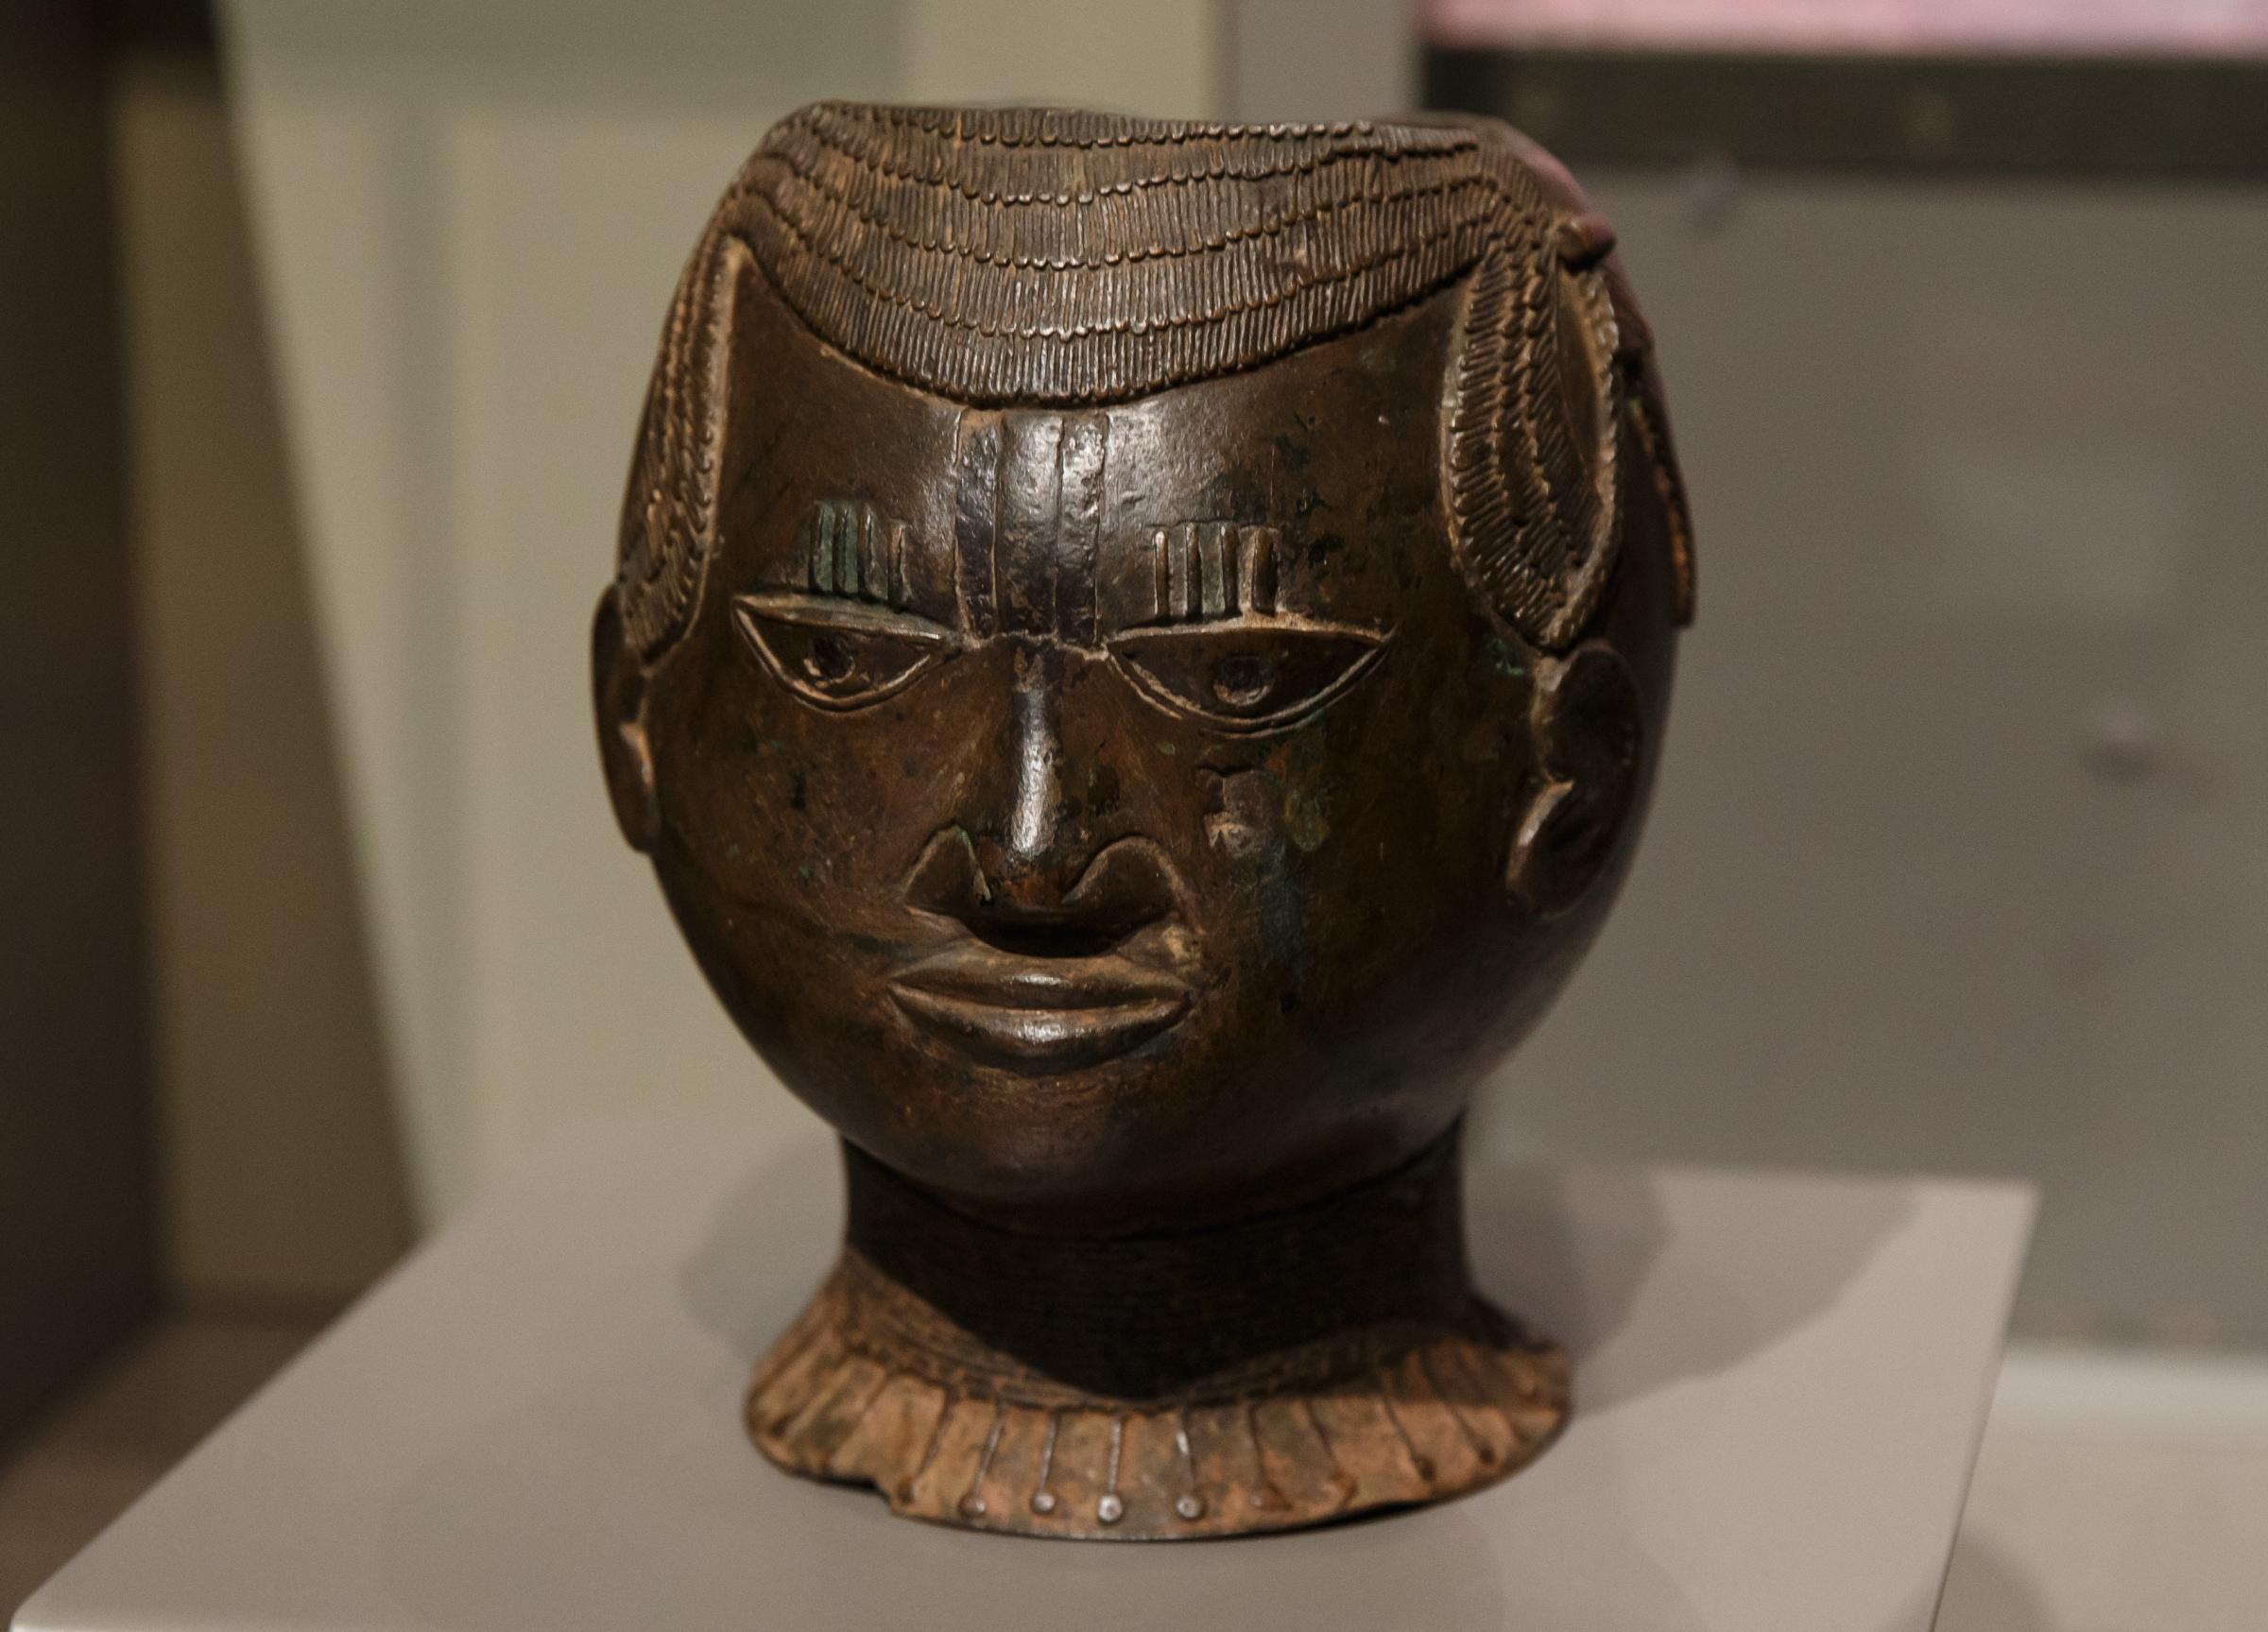 Benin Bronze display at Kelvingrove Art Gallery and Museum.17 Benin bronzes will be repriated to Nigeria, some of which are currently on display at Kelvingrove. Pictured is a head dating from 1502-1602. Photograph by Colin Mearns.